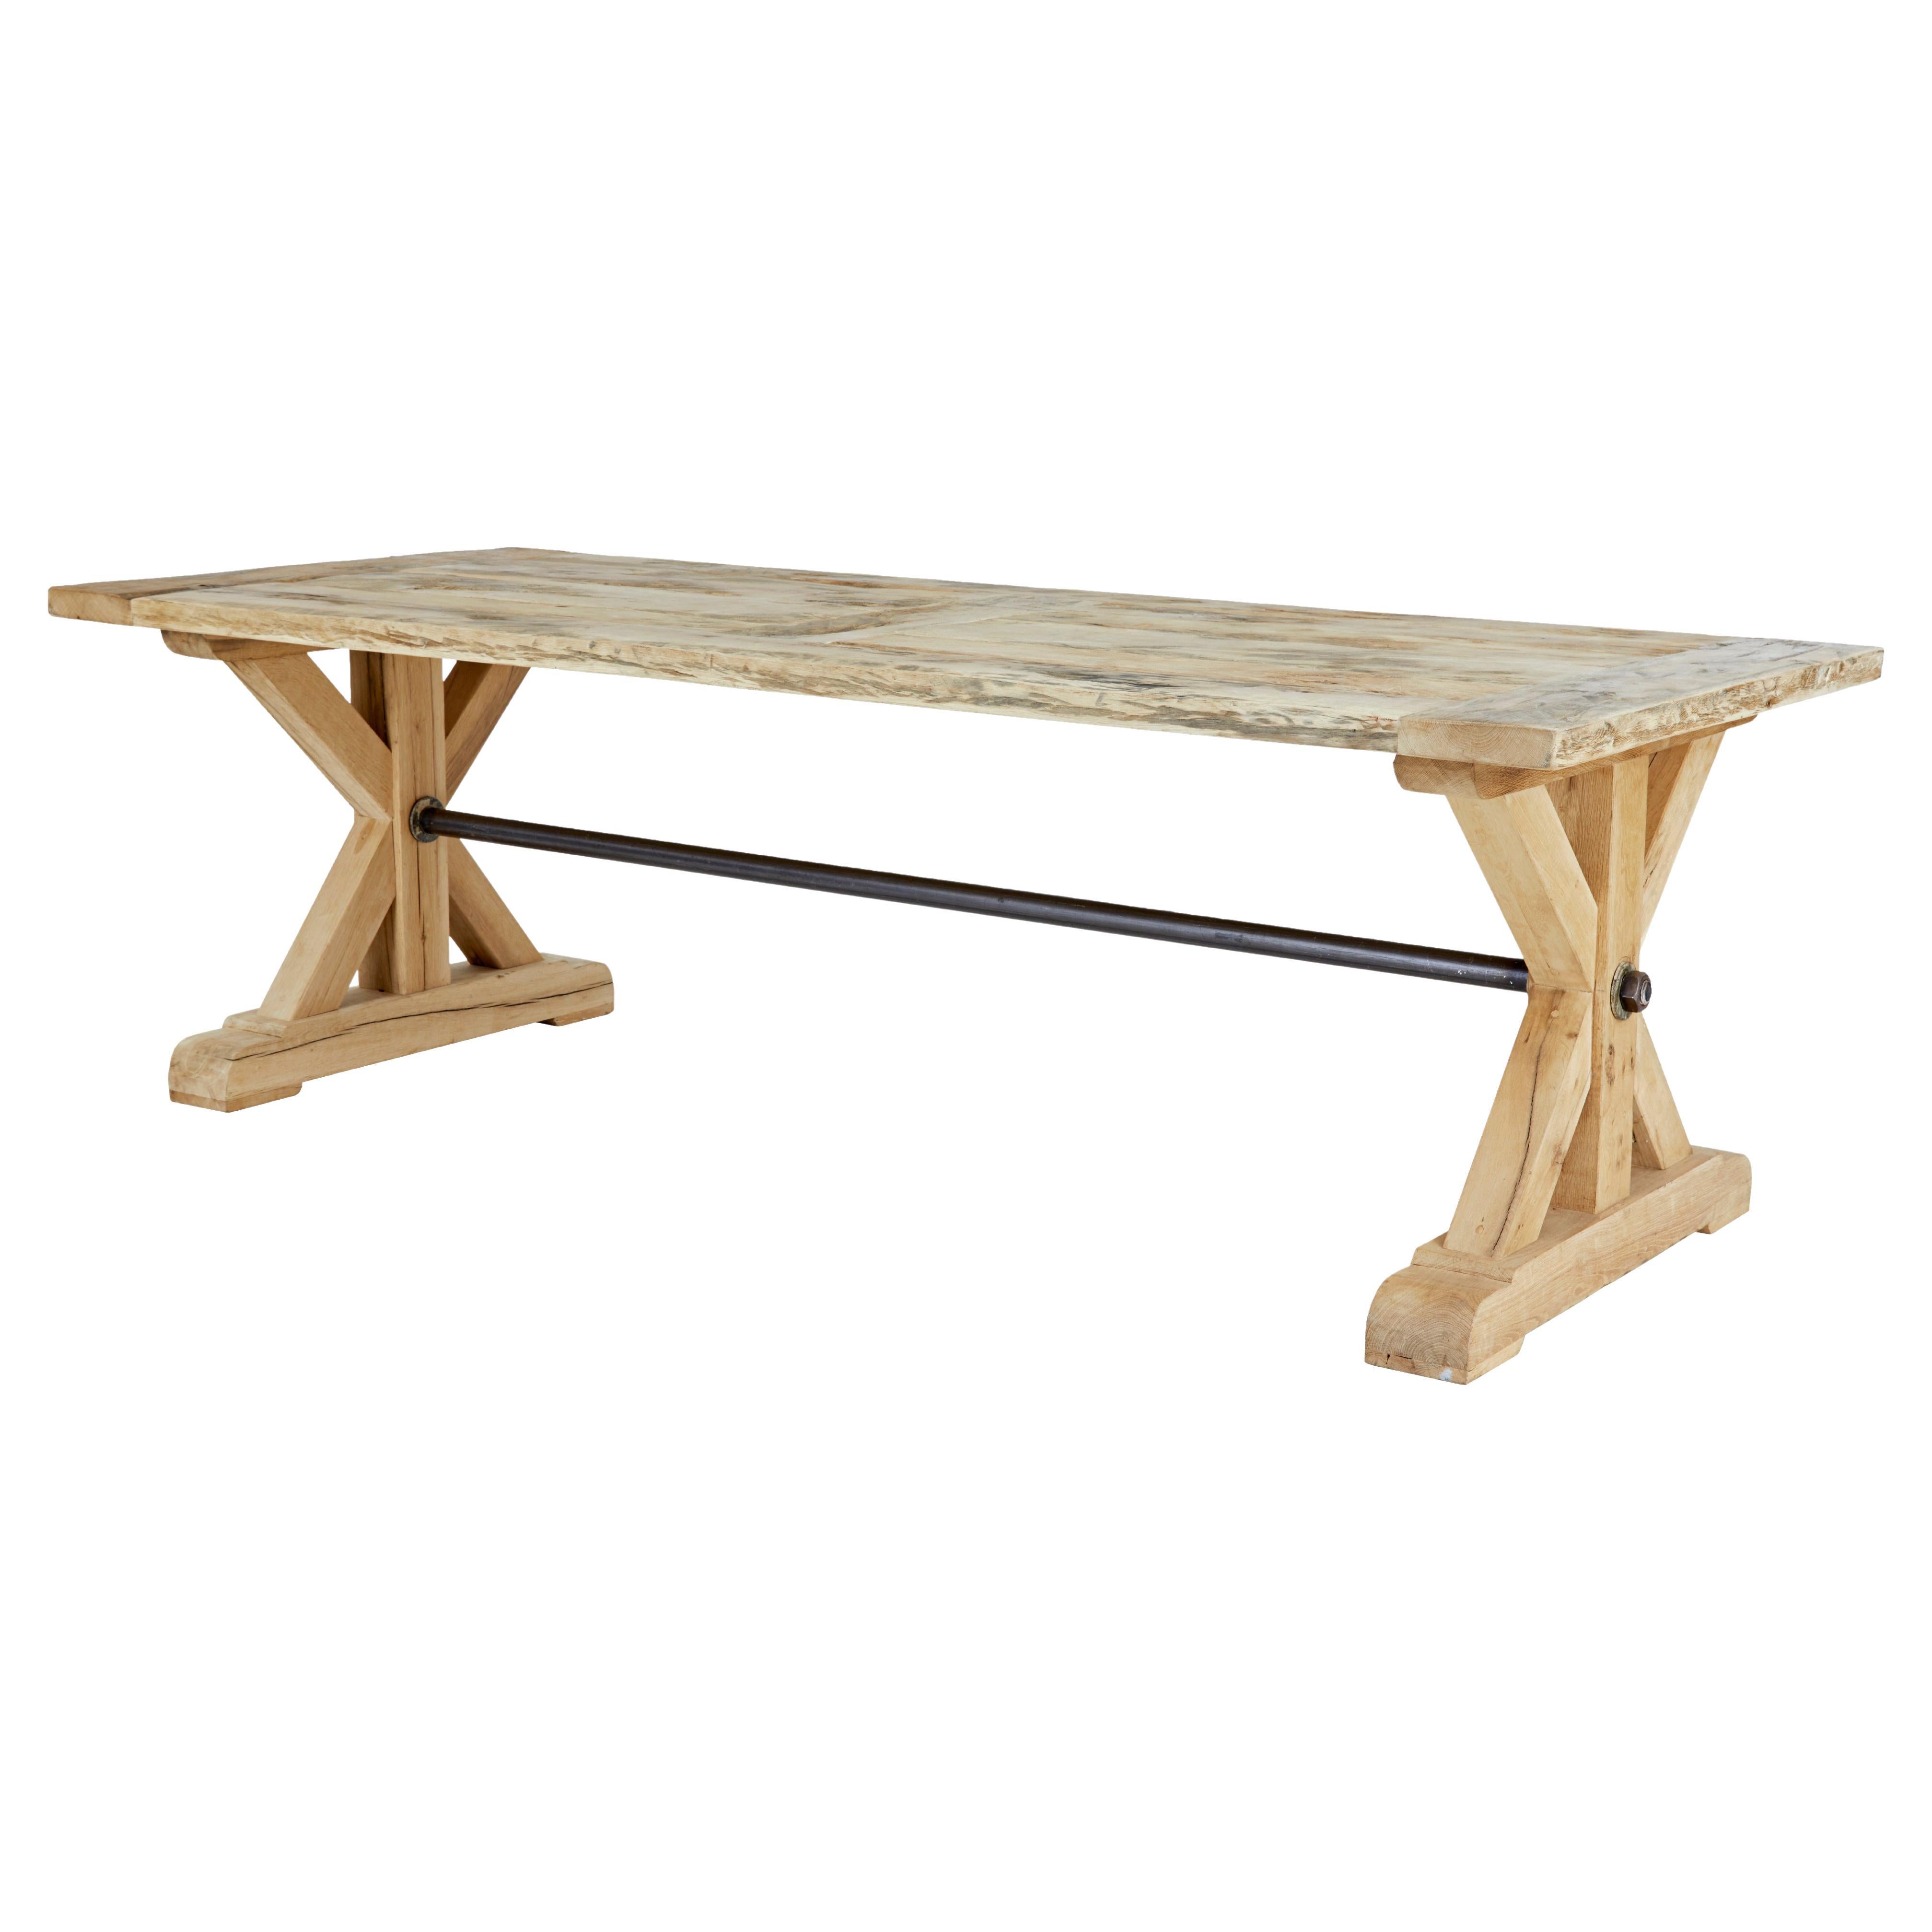 Large solid oak x frame dining table For Sale